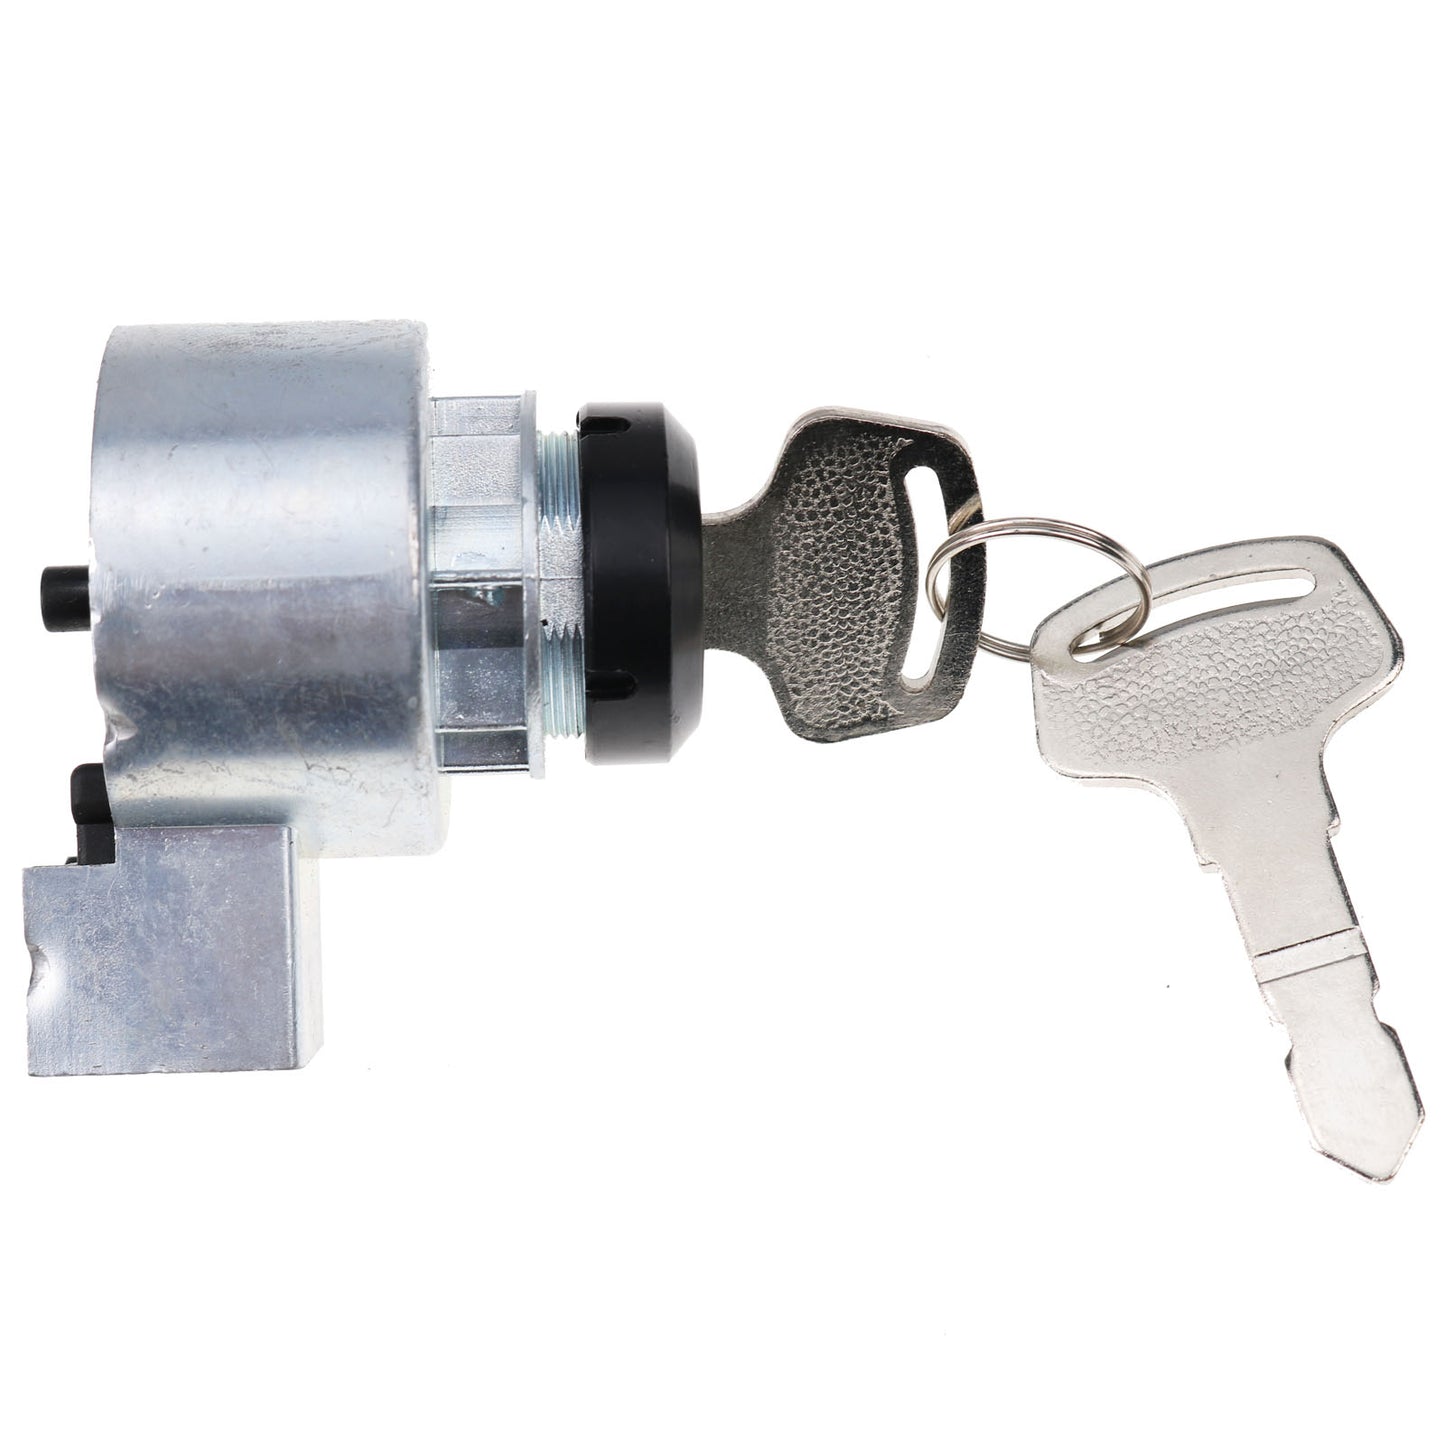 New SBA385202601 Ignition Switch with 2 Keys Compatible with New Holland Boomer, T, TC Tractor